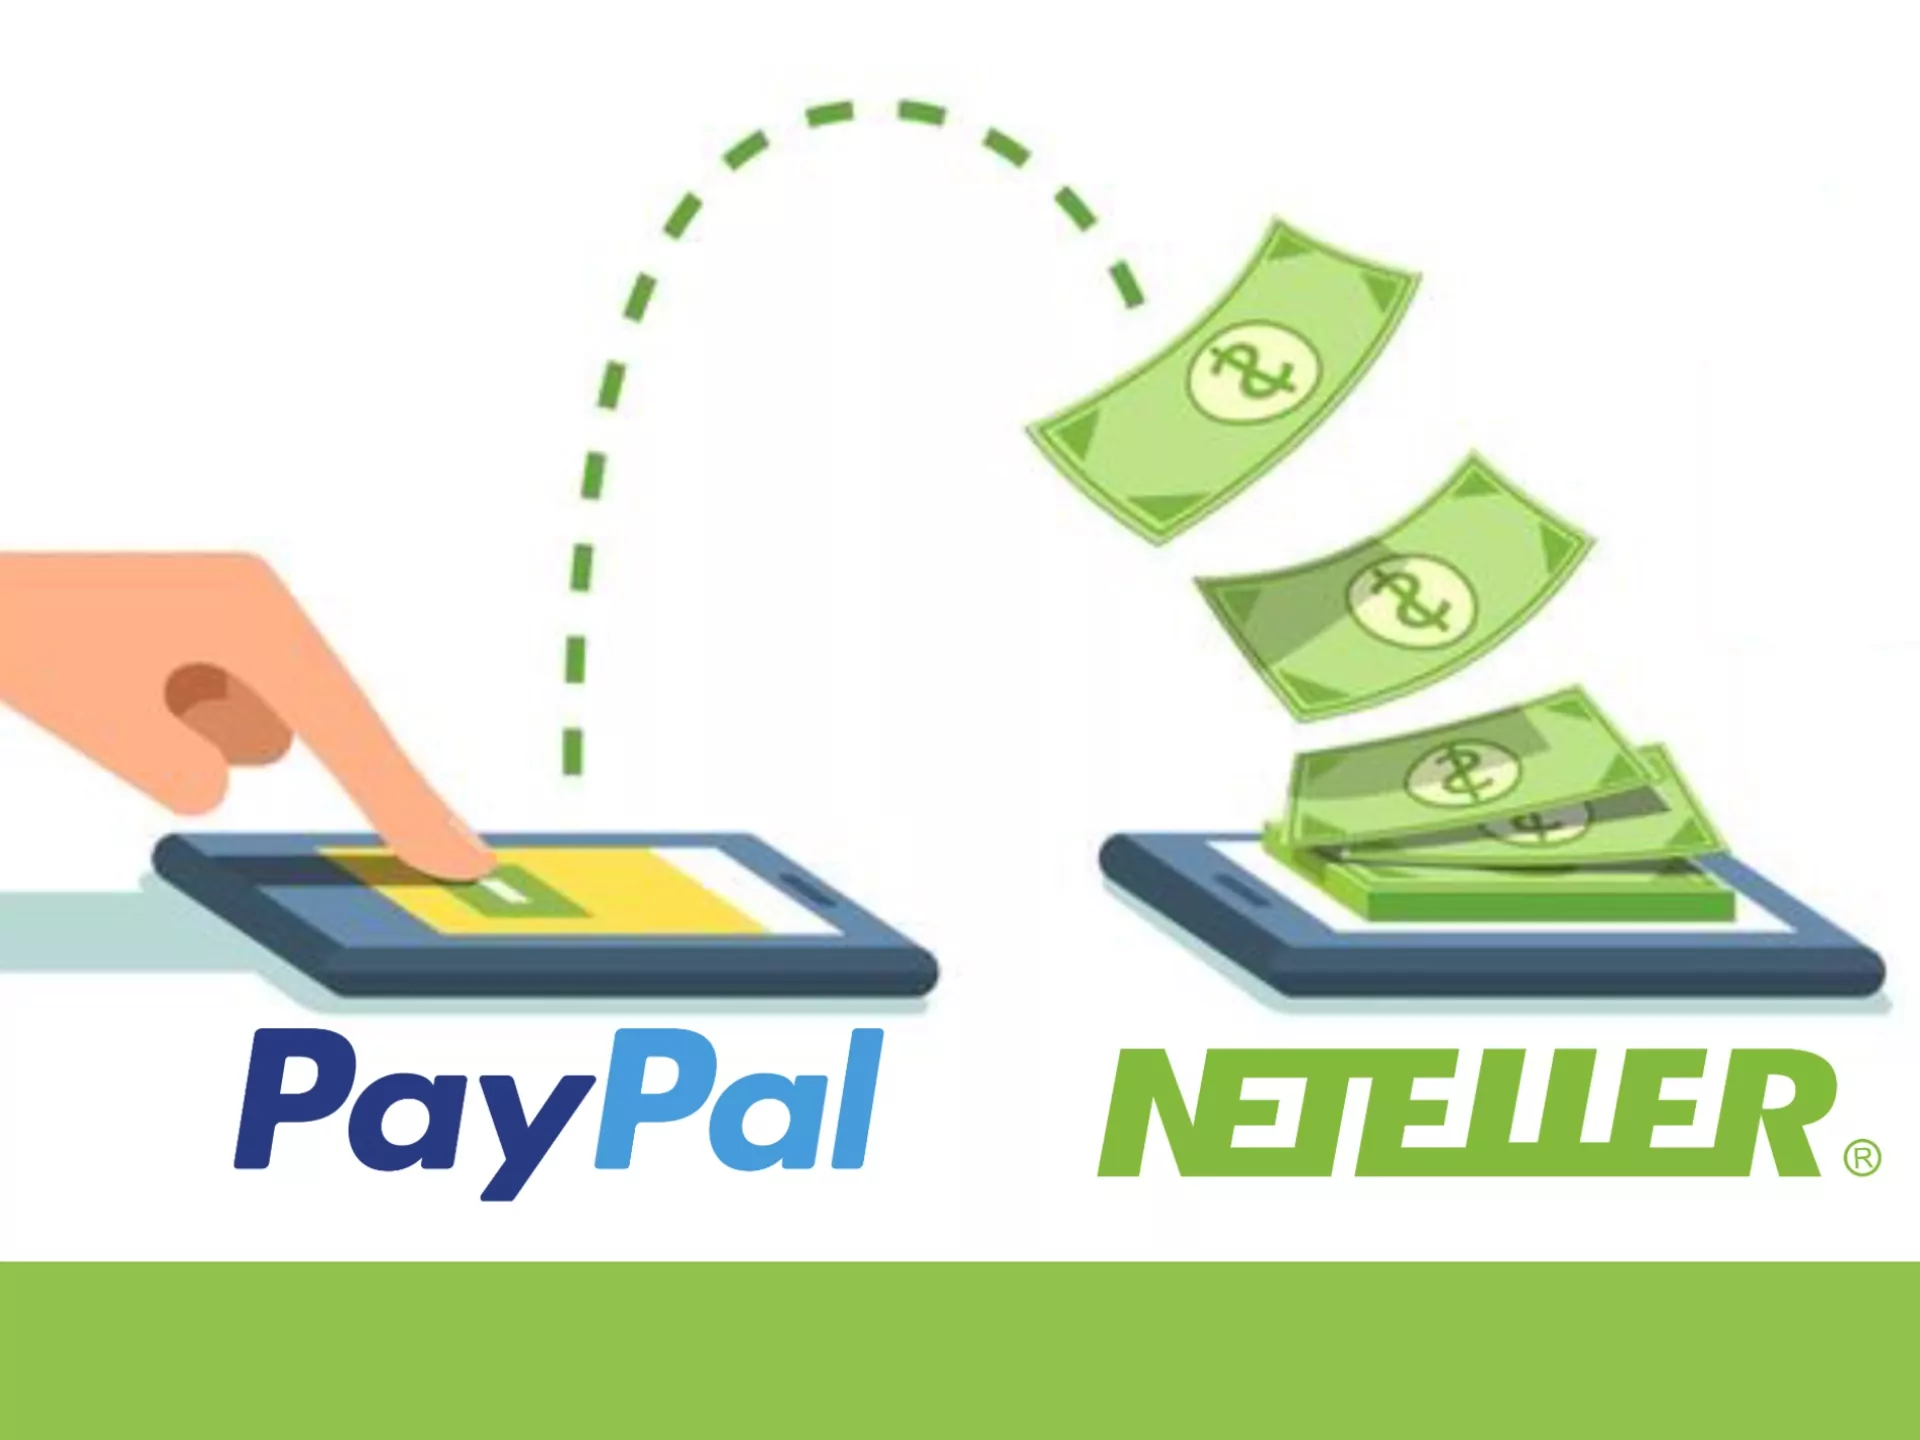 Choose another payment systme to transfer money on PayPal.